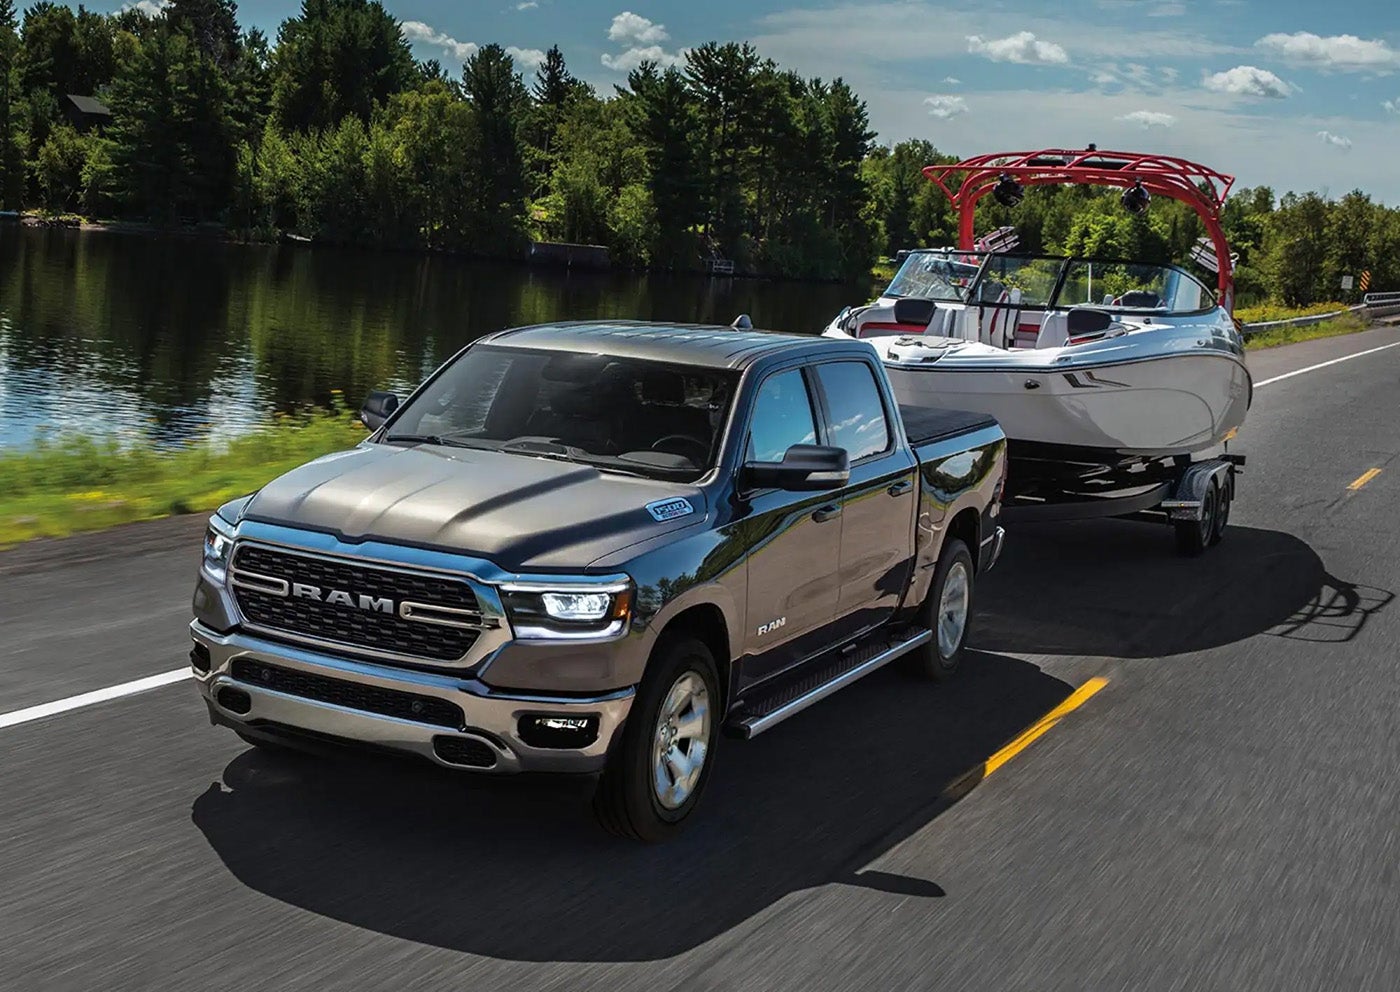 2023 RAM 1500 towing capacity up to 12,750 pounds